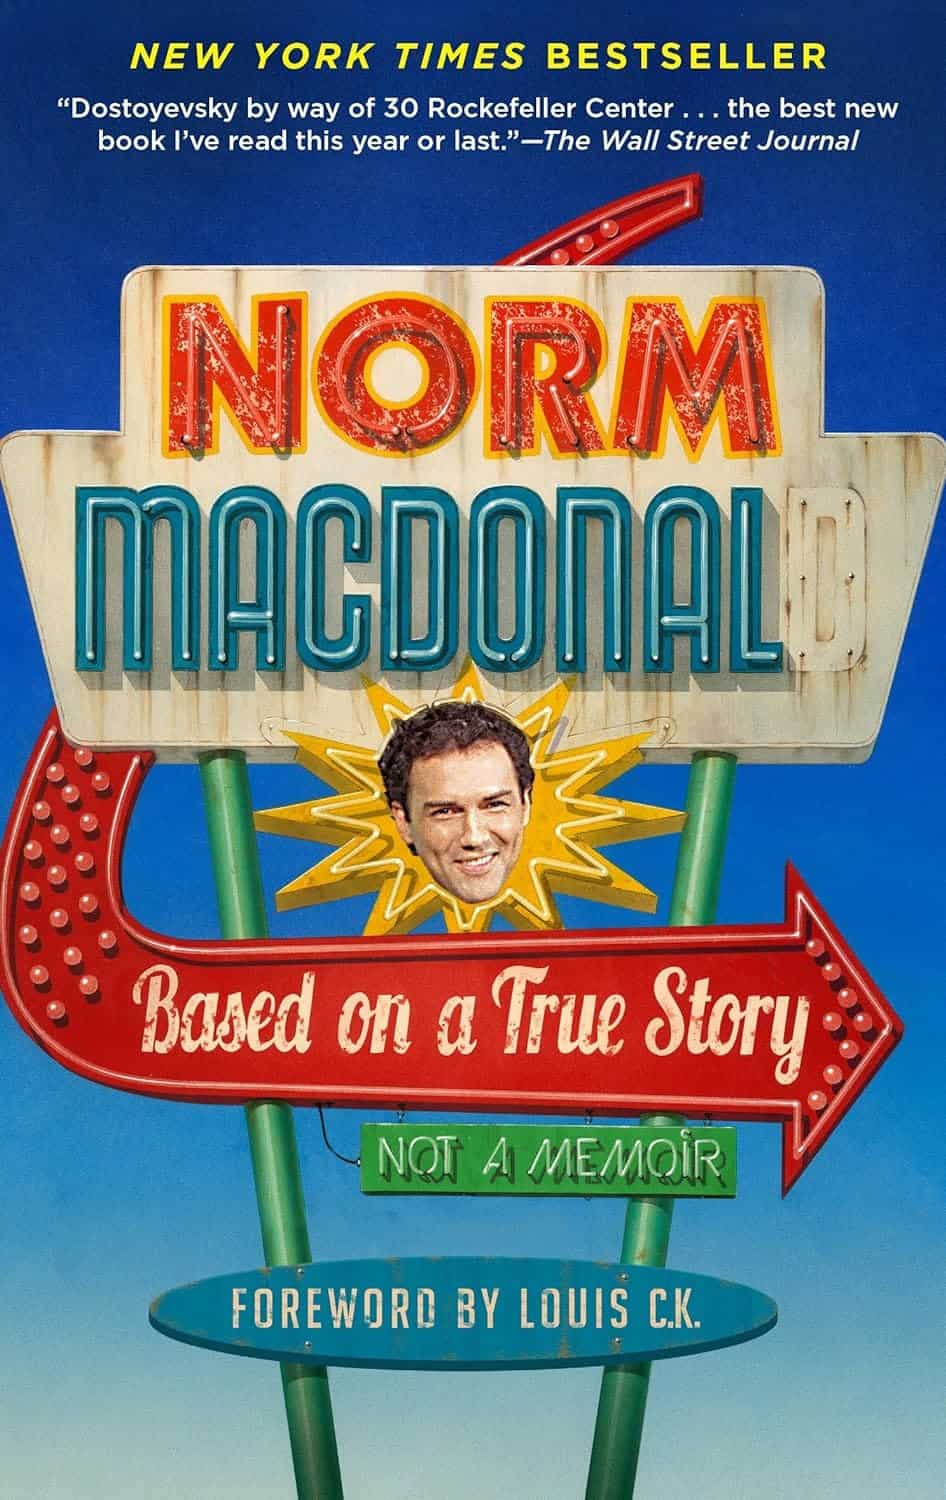 Based on a True Story by Norm Macdonald (2016)